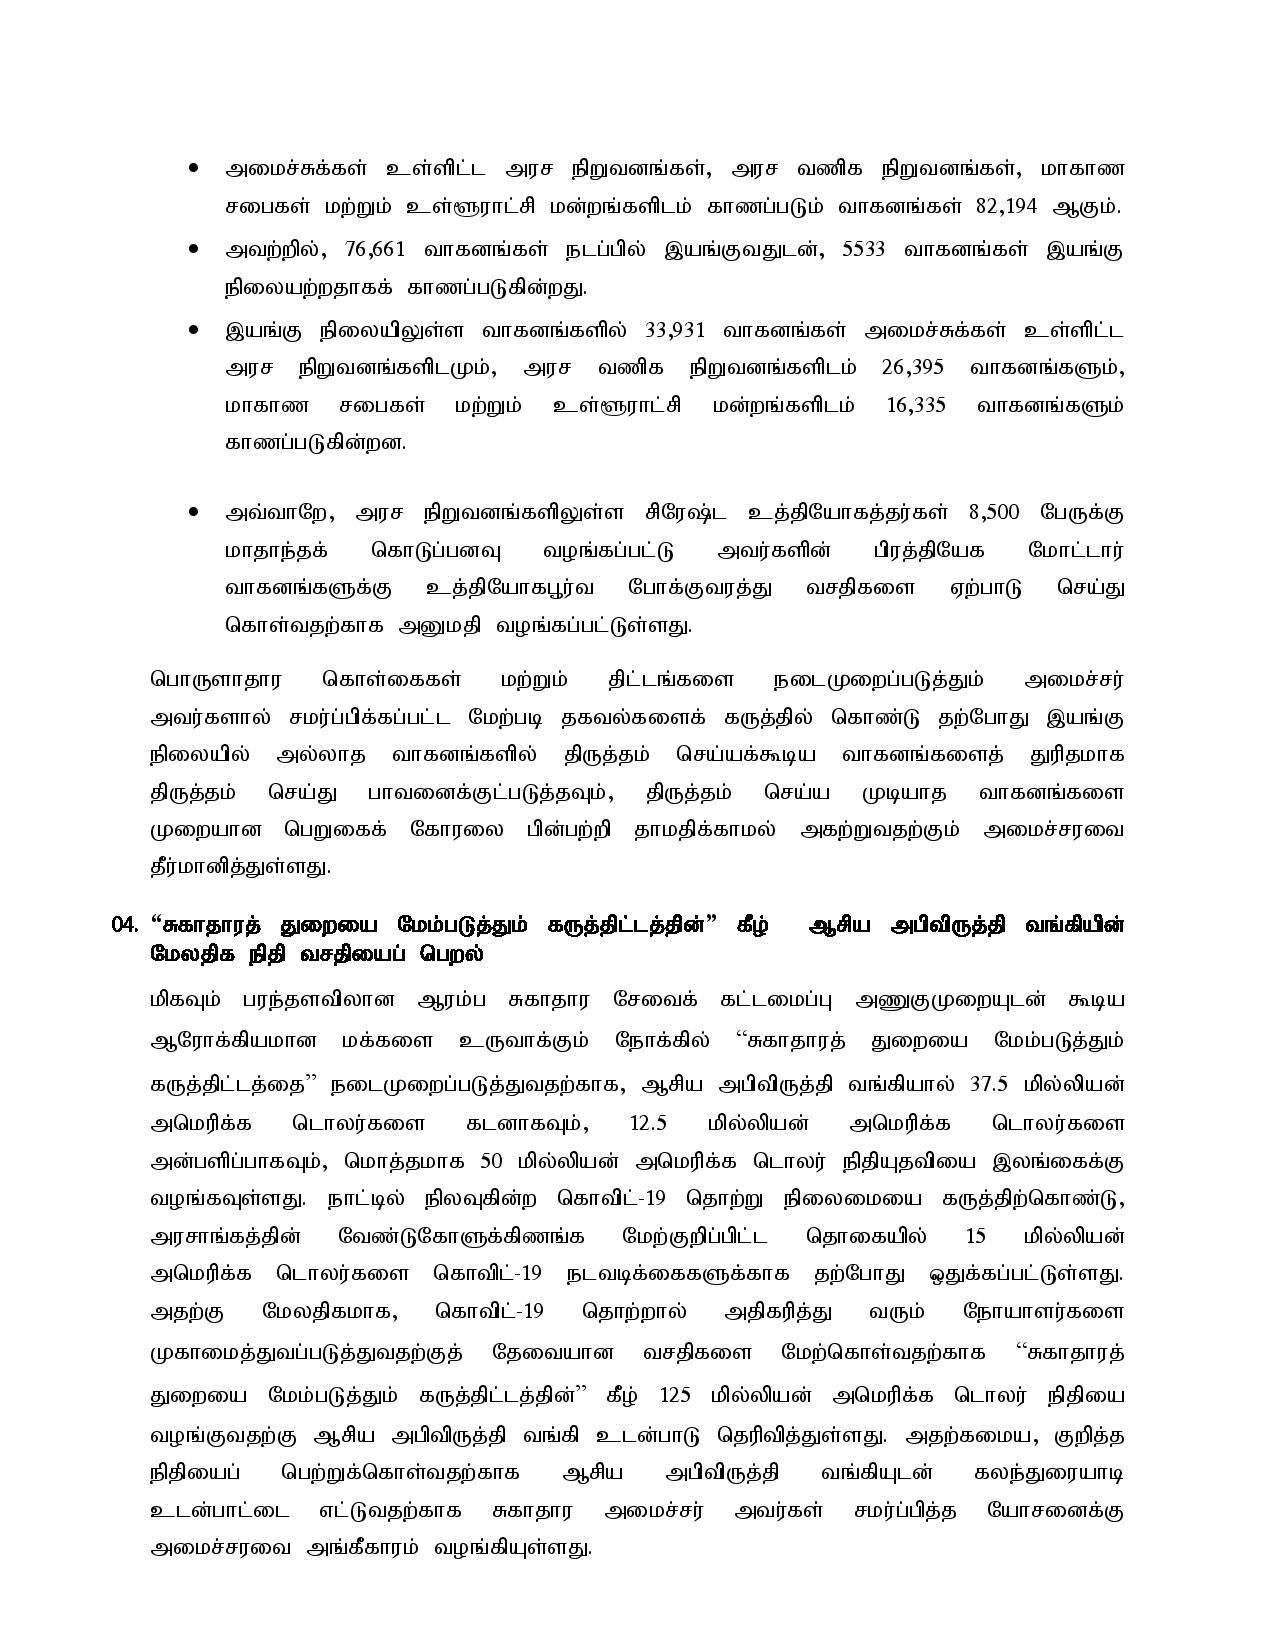 Canbinet Decision on 23.08.2021 Tamil page 002